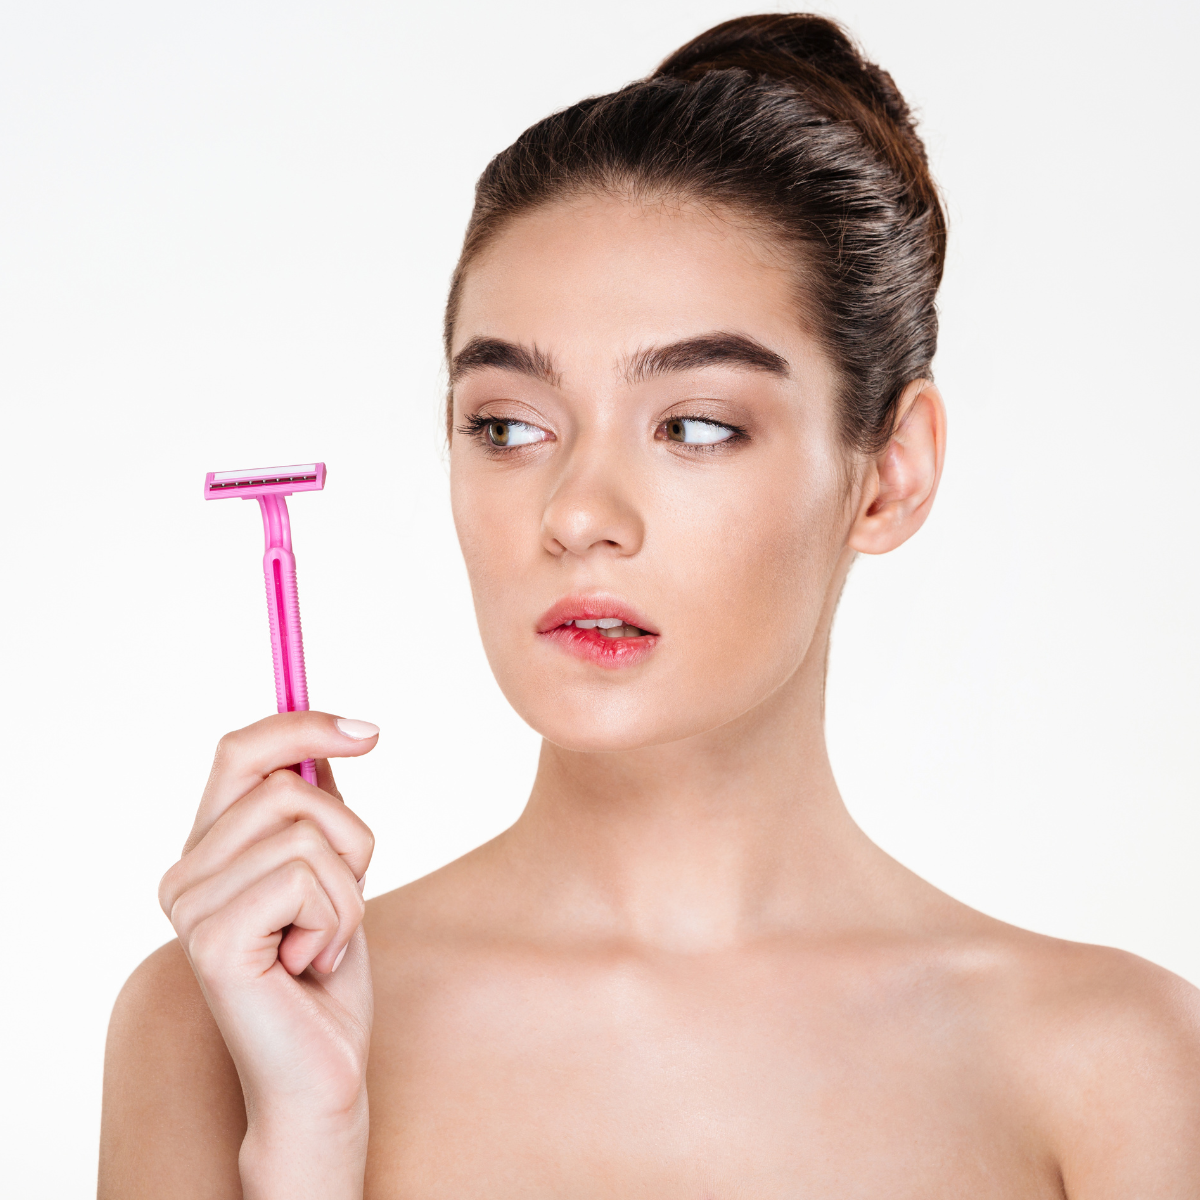 Everything You Need to Know About Nose Hair Removal